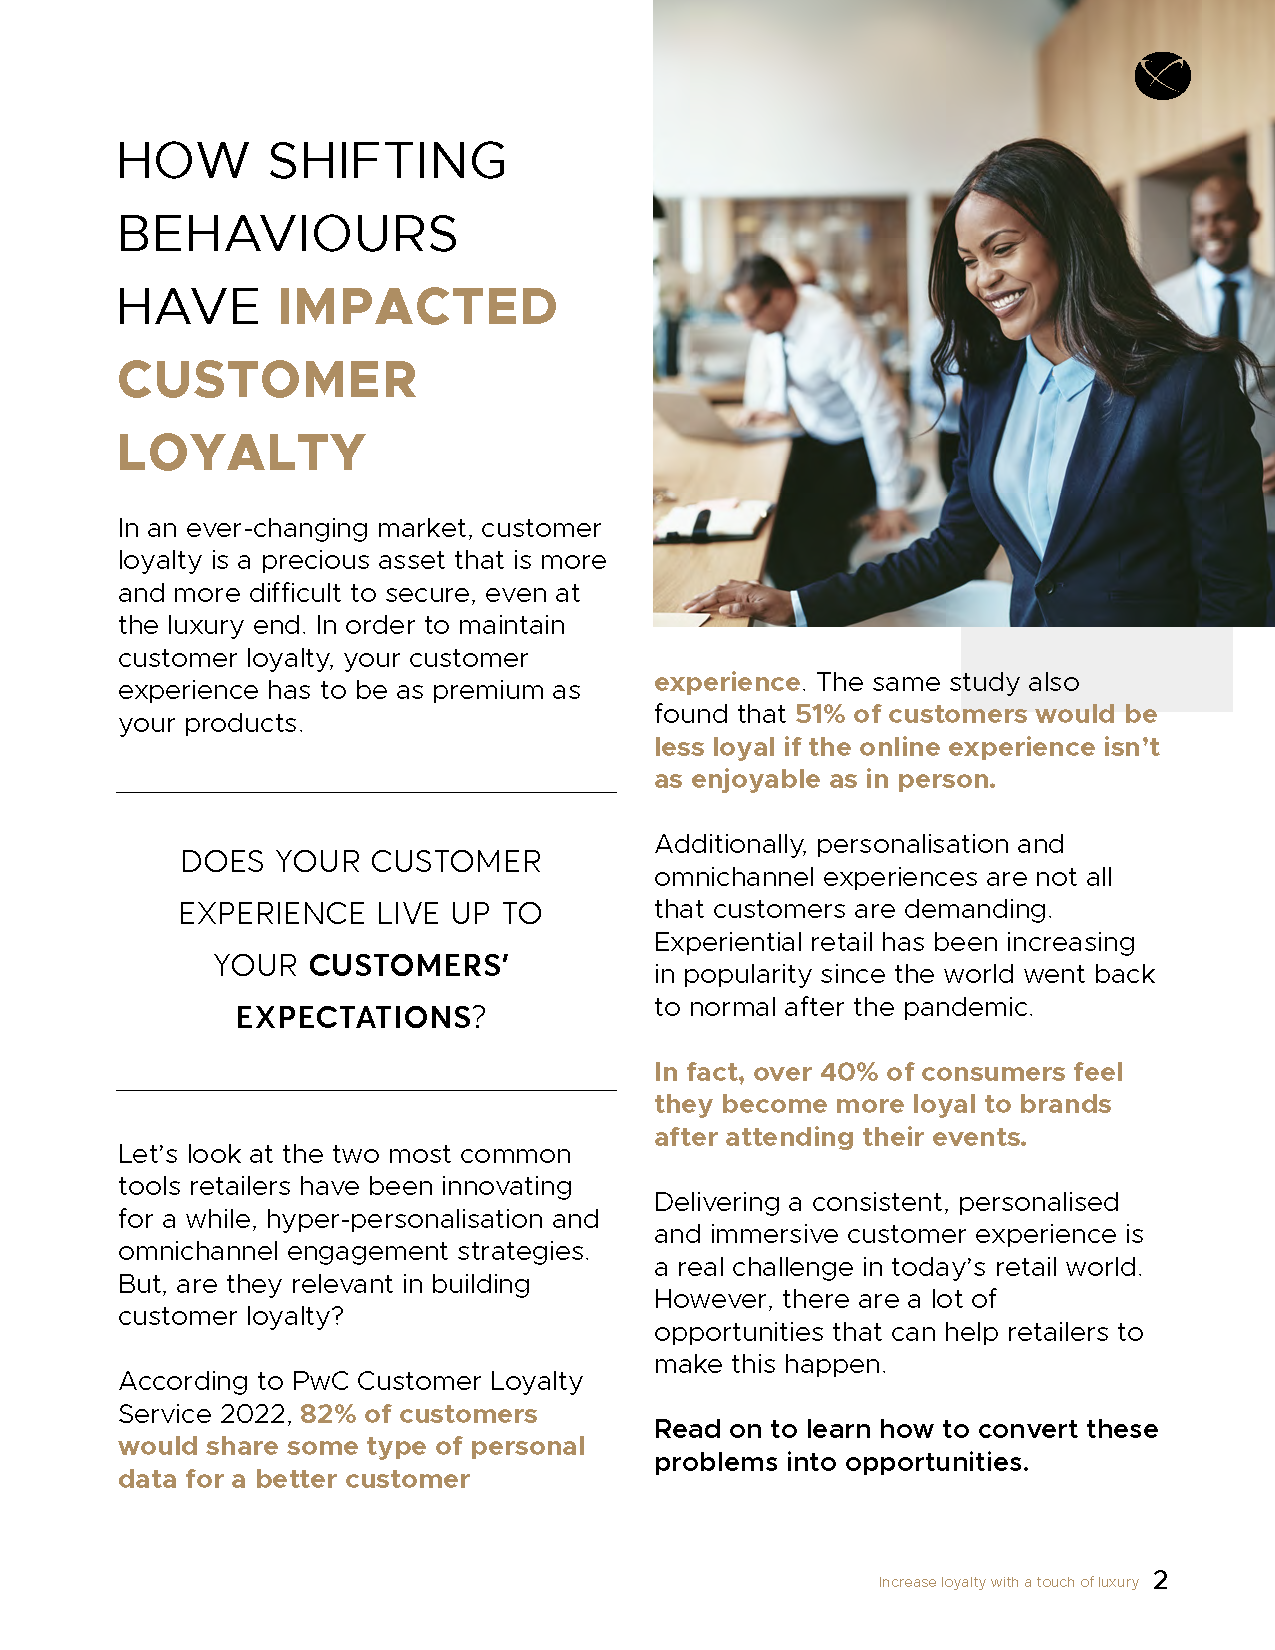 Increase_loyalty_with_a_touch_of_luxury_ACFTechnologies_eg_uk_en_Page_2